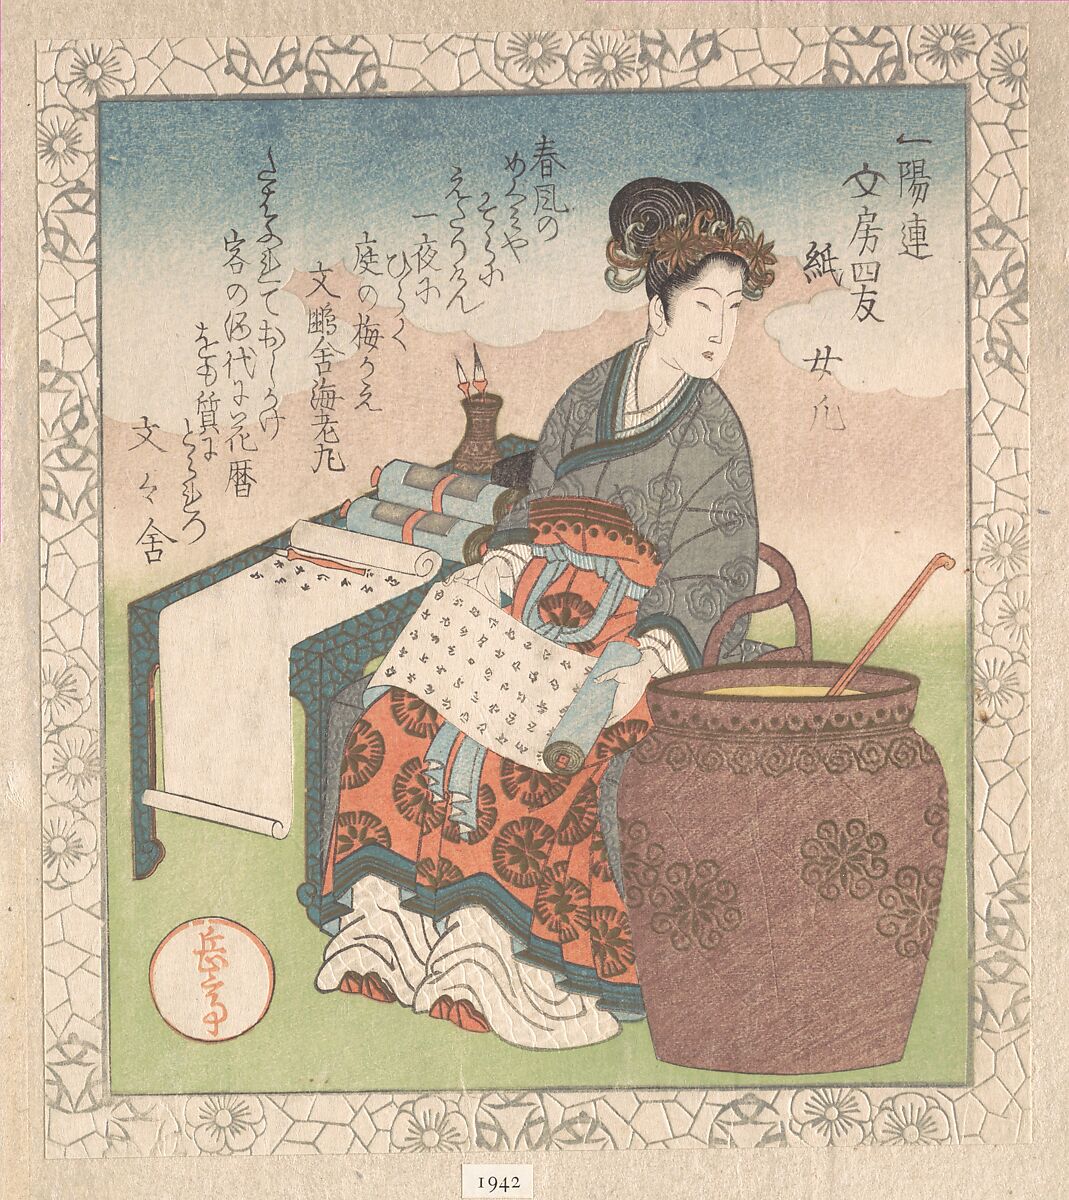 Nuji (Japanese: Joki; female attendant who compiled writings by Daoist sages); “Paper” (Kami), from Four Friends of the Writing Table for the Ichiyō Poetry Circle (Ichiyō-ren Bunbō shiyū)
From the Spring Rain Collection (Harusame shū), vol. 1, Yashima Gakutei (Japanese, 1786?–1868), Woodblock print (surimono); ink and color on paper, Japan 